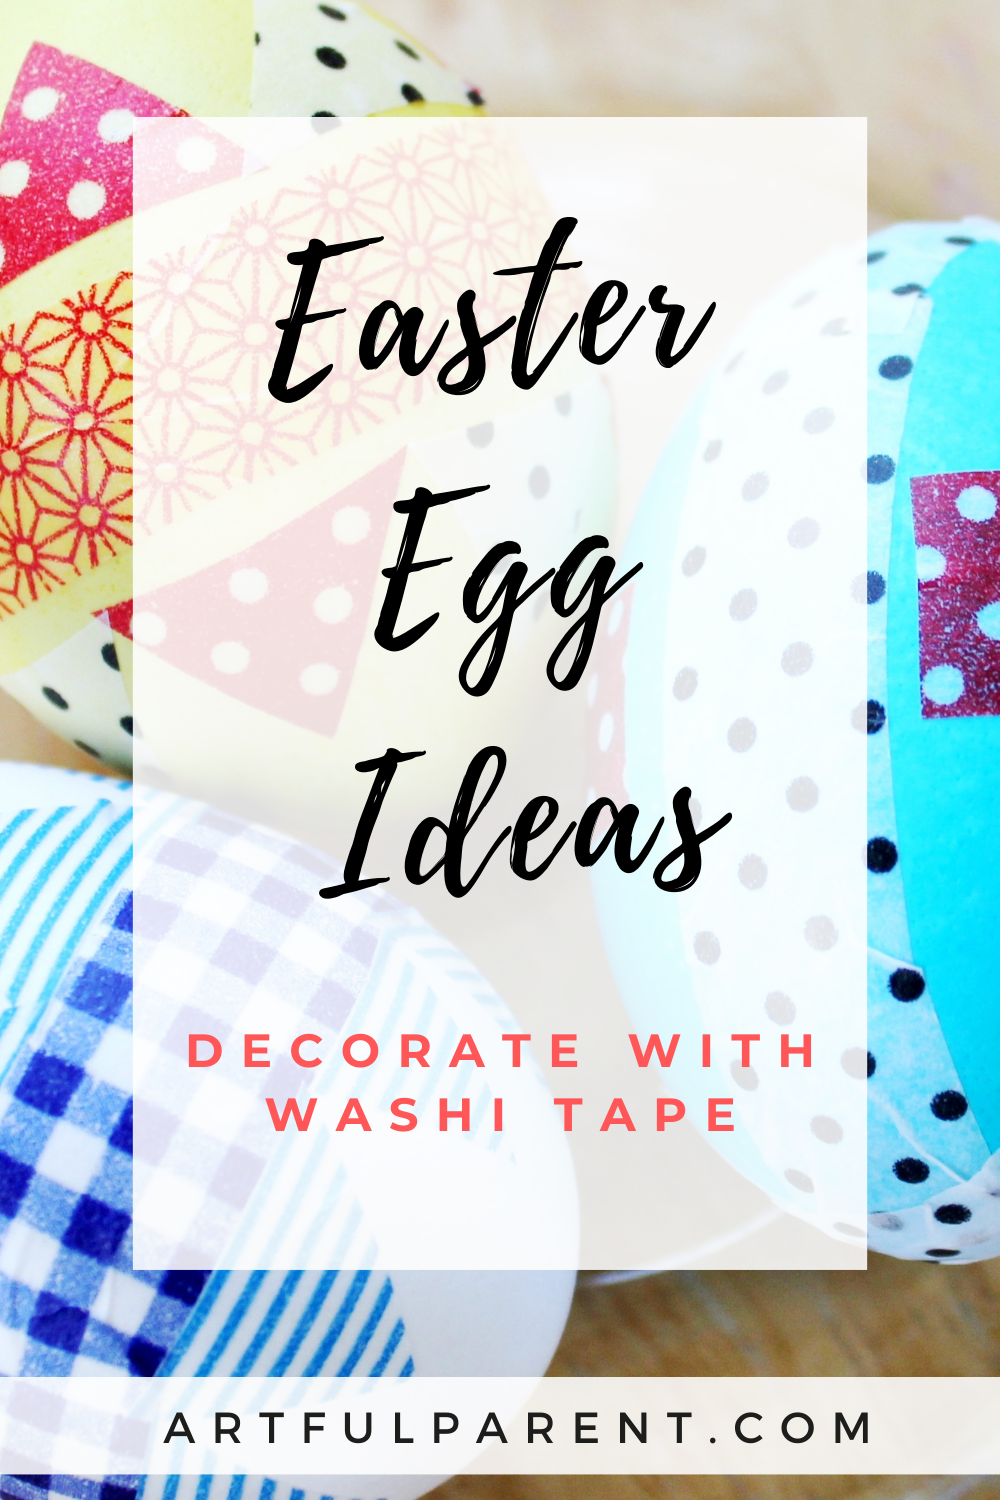 How to Use Washi Tape to Decorate Easter Eggs